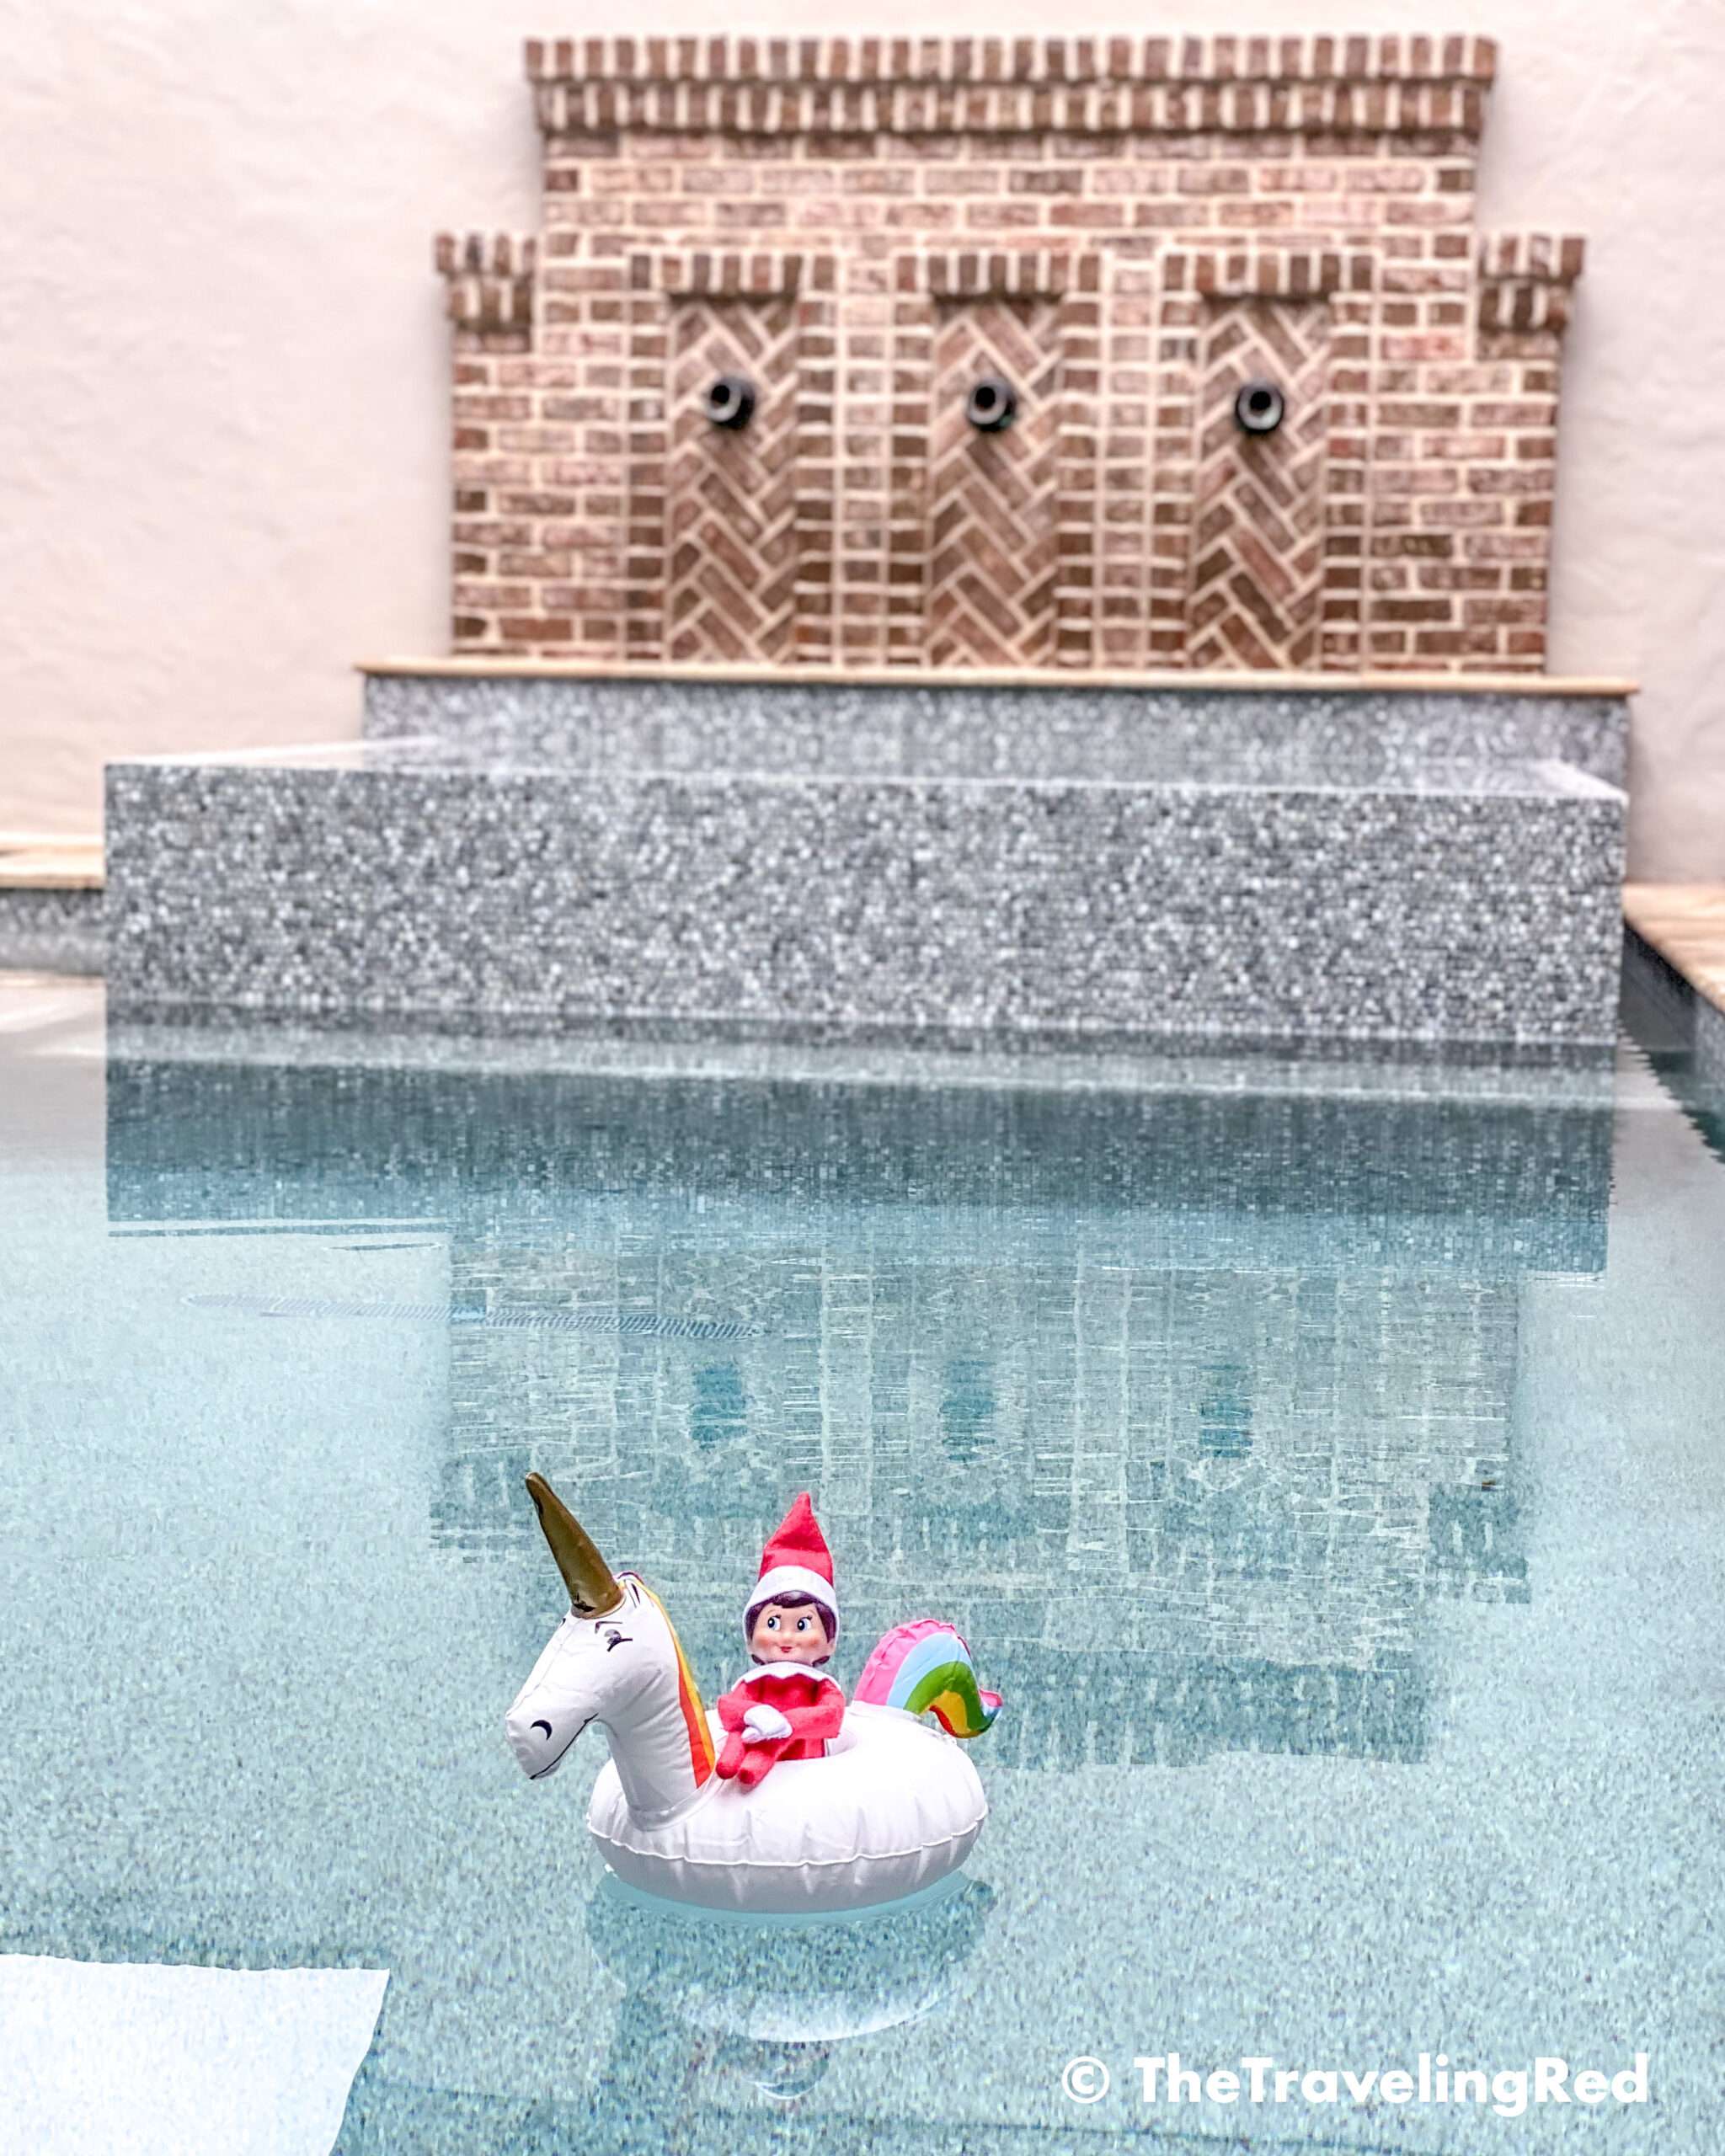 Naughty Elf on the shelf used a unicorn cup float to lounge in the pool. Fun and easy elf on the shelf ideas for a naughty elf that are quick and easy using things you have at home.